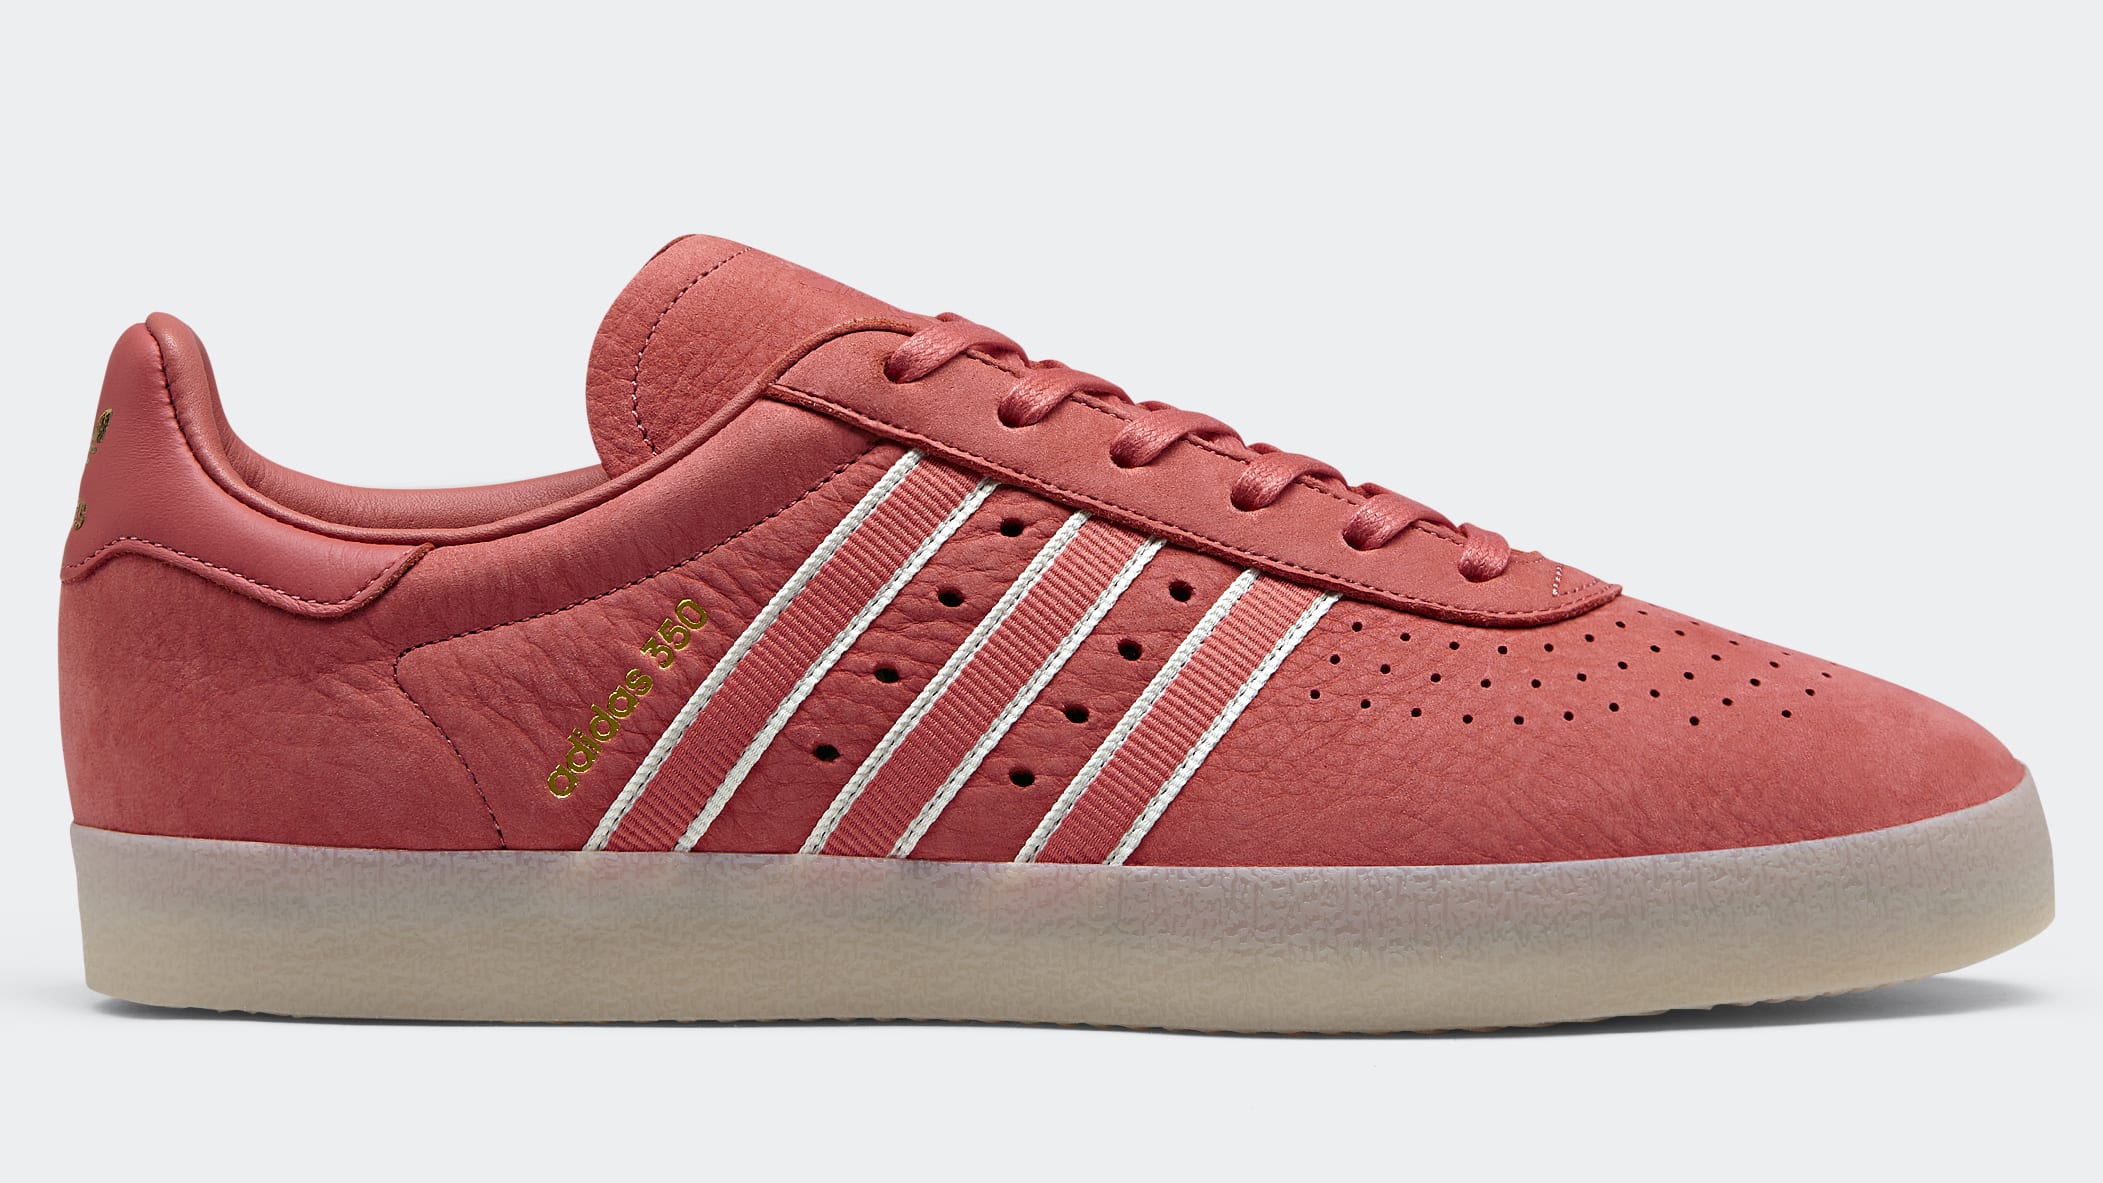 Oyster Holdings x Adidas 350 &#x27;Trace Scarlet&#x27; DB1975